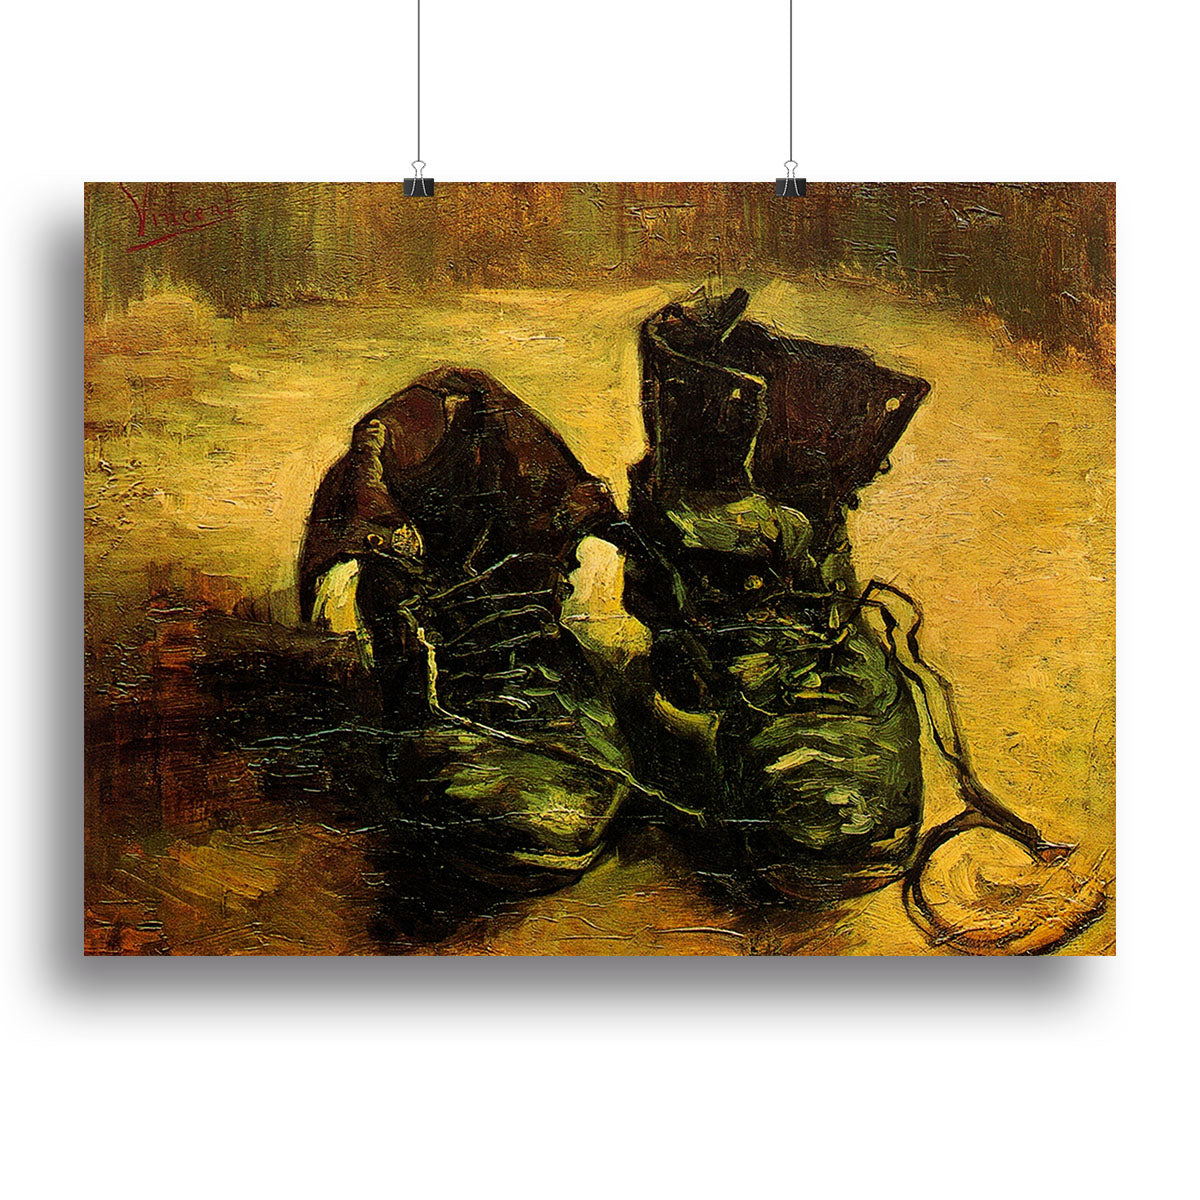 A Pair of Shoes 2 by Van Gogh Canvas Print or Poster - Canvas Art Rocks - 2